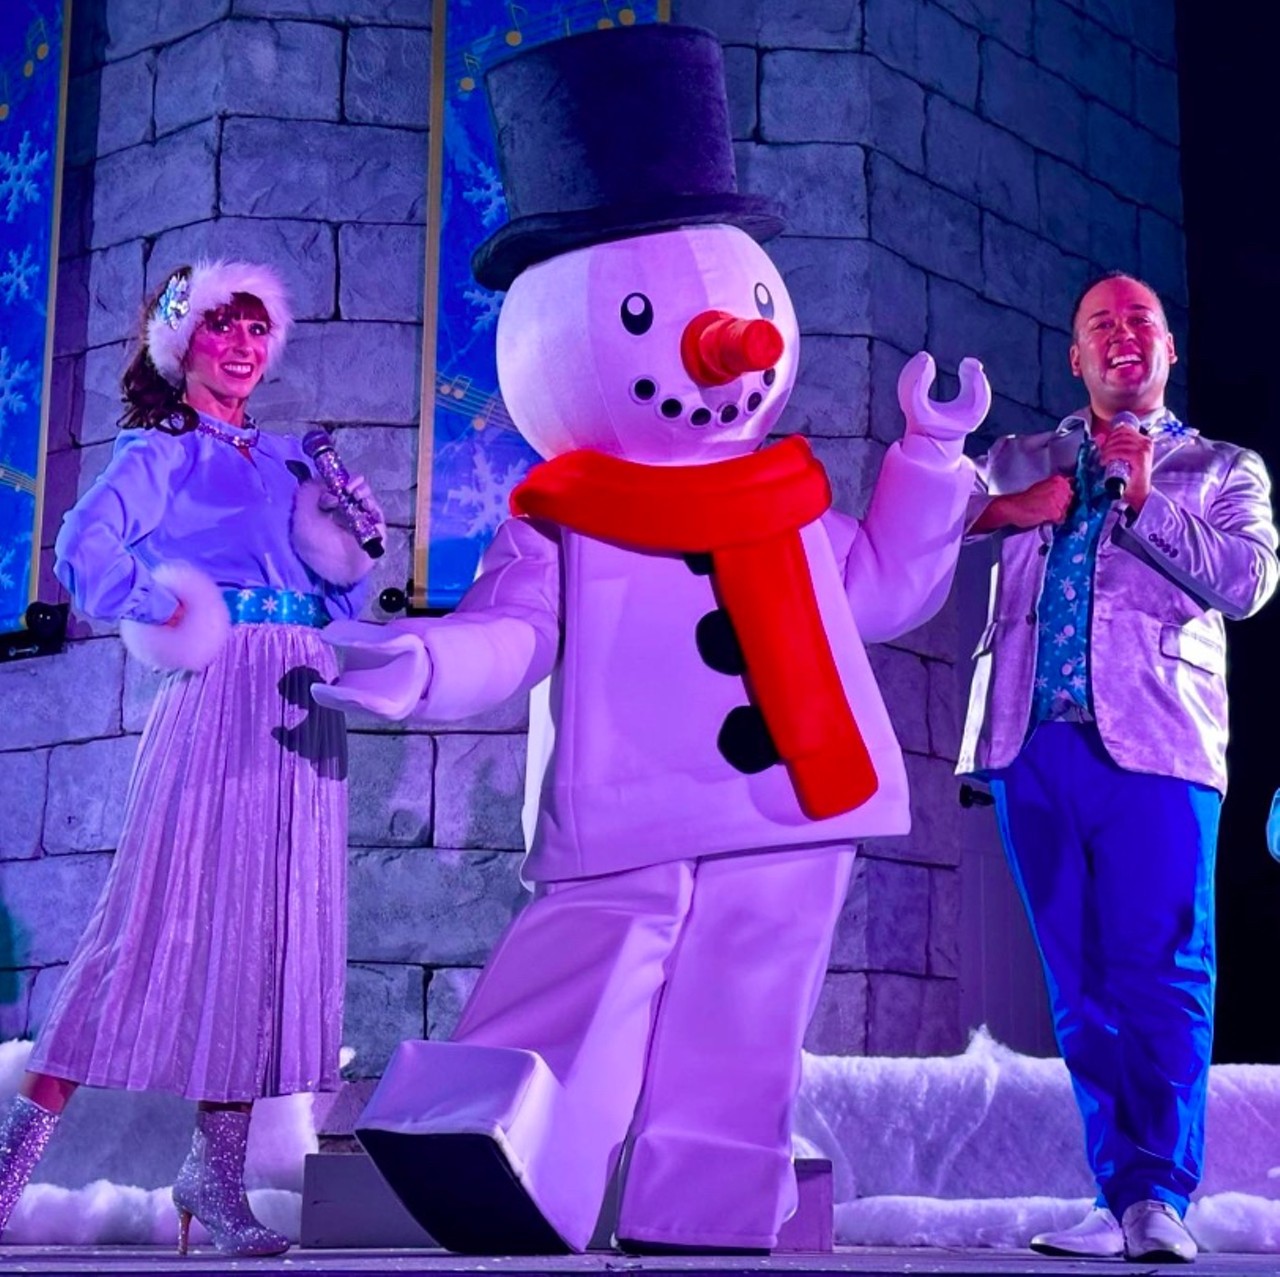 Holidays at Legoland 
1 Legoland Way, Winter Haven
Dates open: Nov. 24-26, Dec. 2-3, Dec. 9-10, Dec. 16-17, Dec. 22-31
Cost: Ticket prices range from $94-$163, prices for Florida residents vary
The Winter Haven park turns into a brick-ified holiday wonderland with truly impressive Lego Christmas builds, plenty of lights and decor, character experiences and festive food and shopping. There are five holiday villages throughout the park featuring opportunities to build toys and a sleigh for Santa, sing-alongs and scavenger hunts and meet-and-greets with Lego Santa, Lego Gingerbread Man and Lego toys.